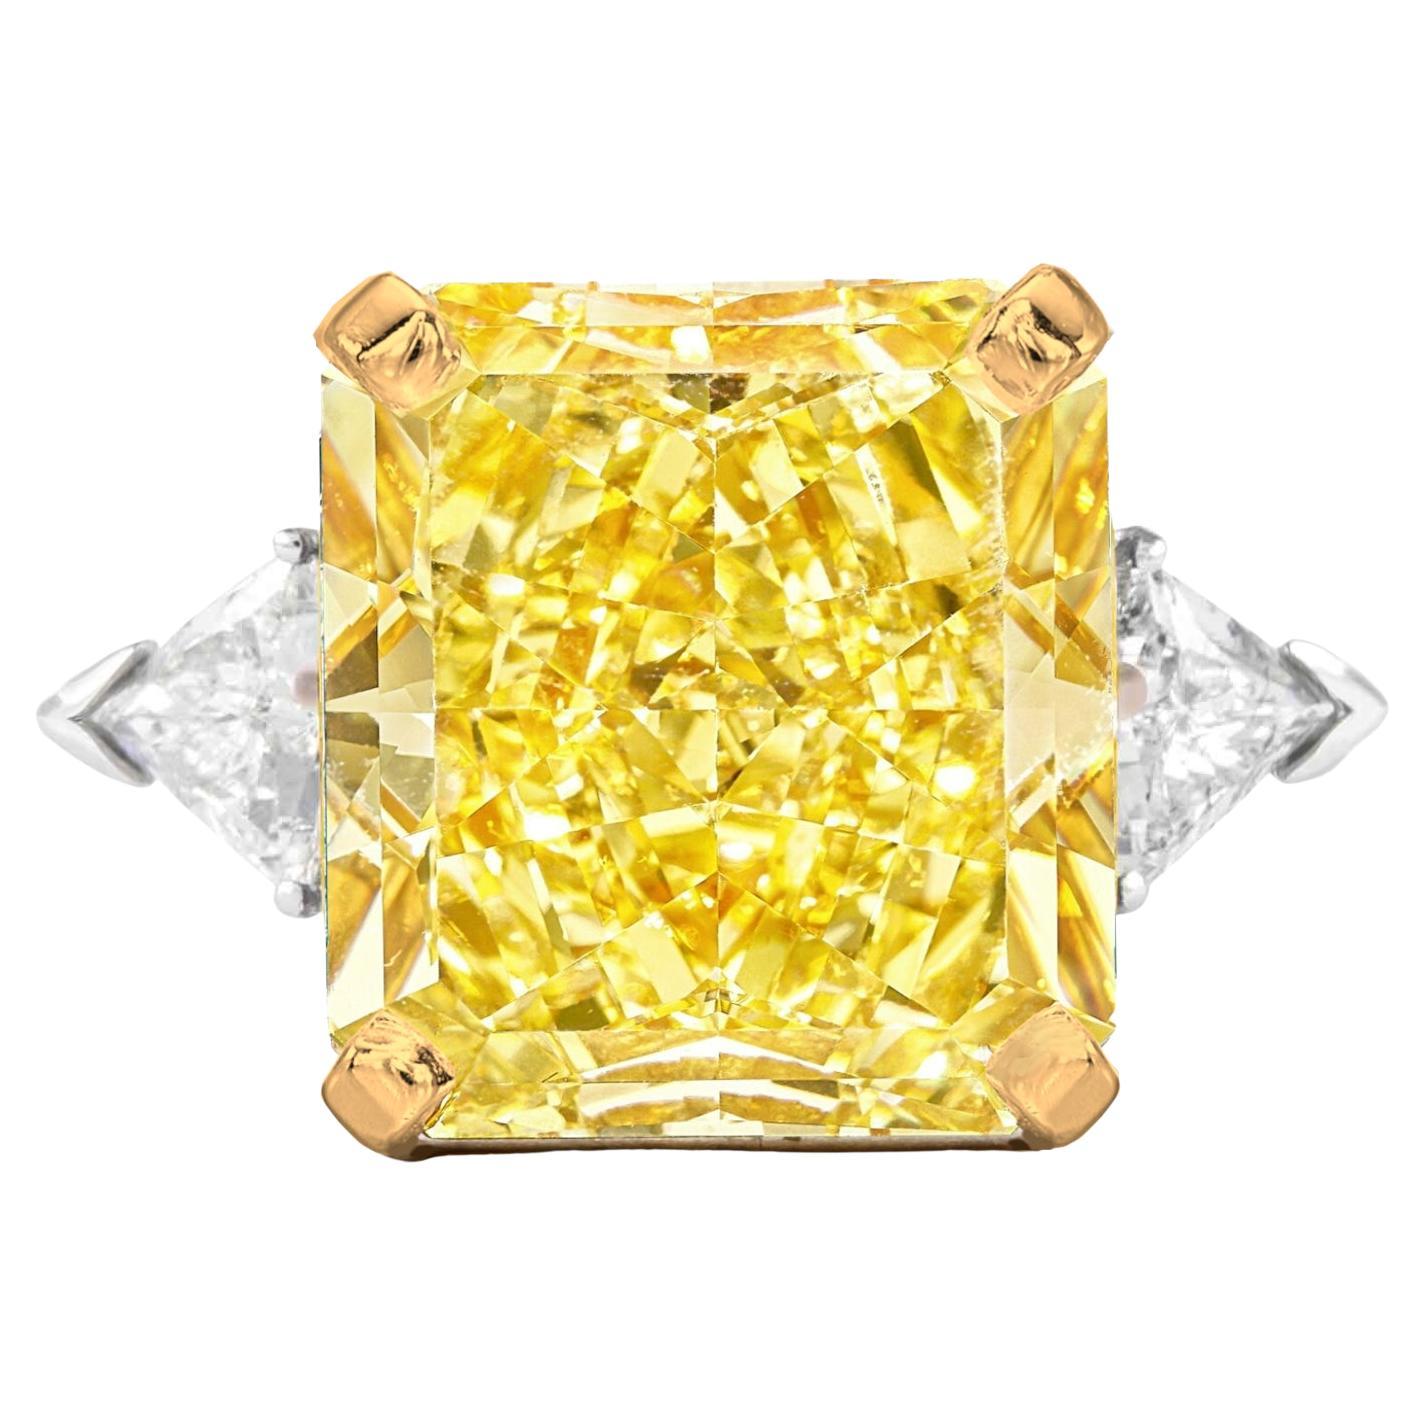 Introducing the mesmerizing GIA Certified 7.01 Carat Radiant Cut Fancy Yellow Diamond Ring, a true testament to luxury and elegance. This exquisite ring features a stunning radiant-cut diamond, certified by the esteemed Gemological Institute of